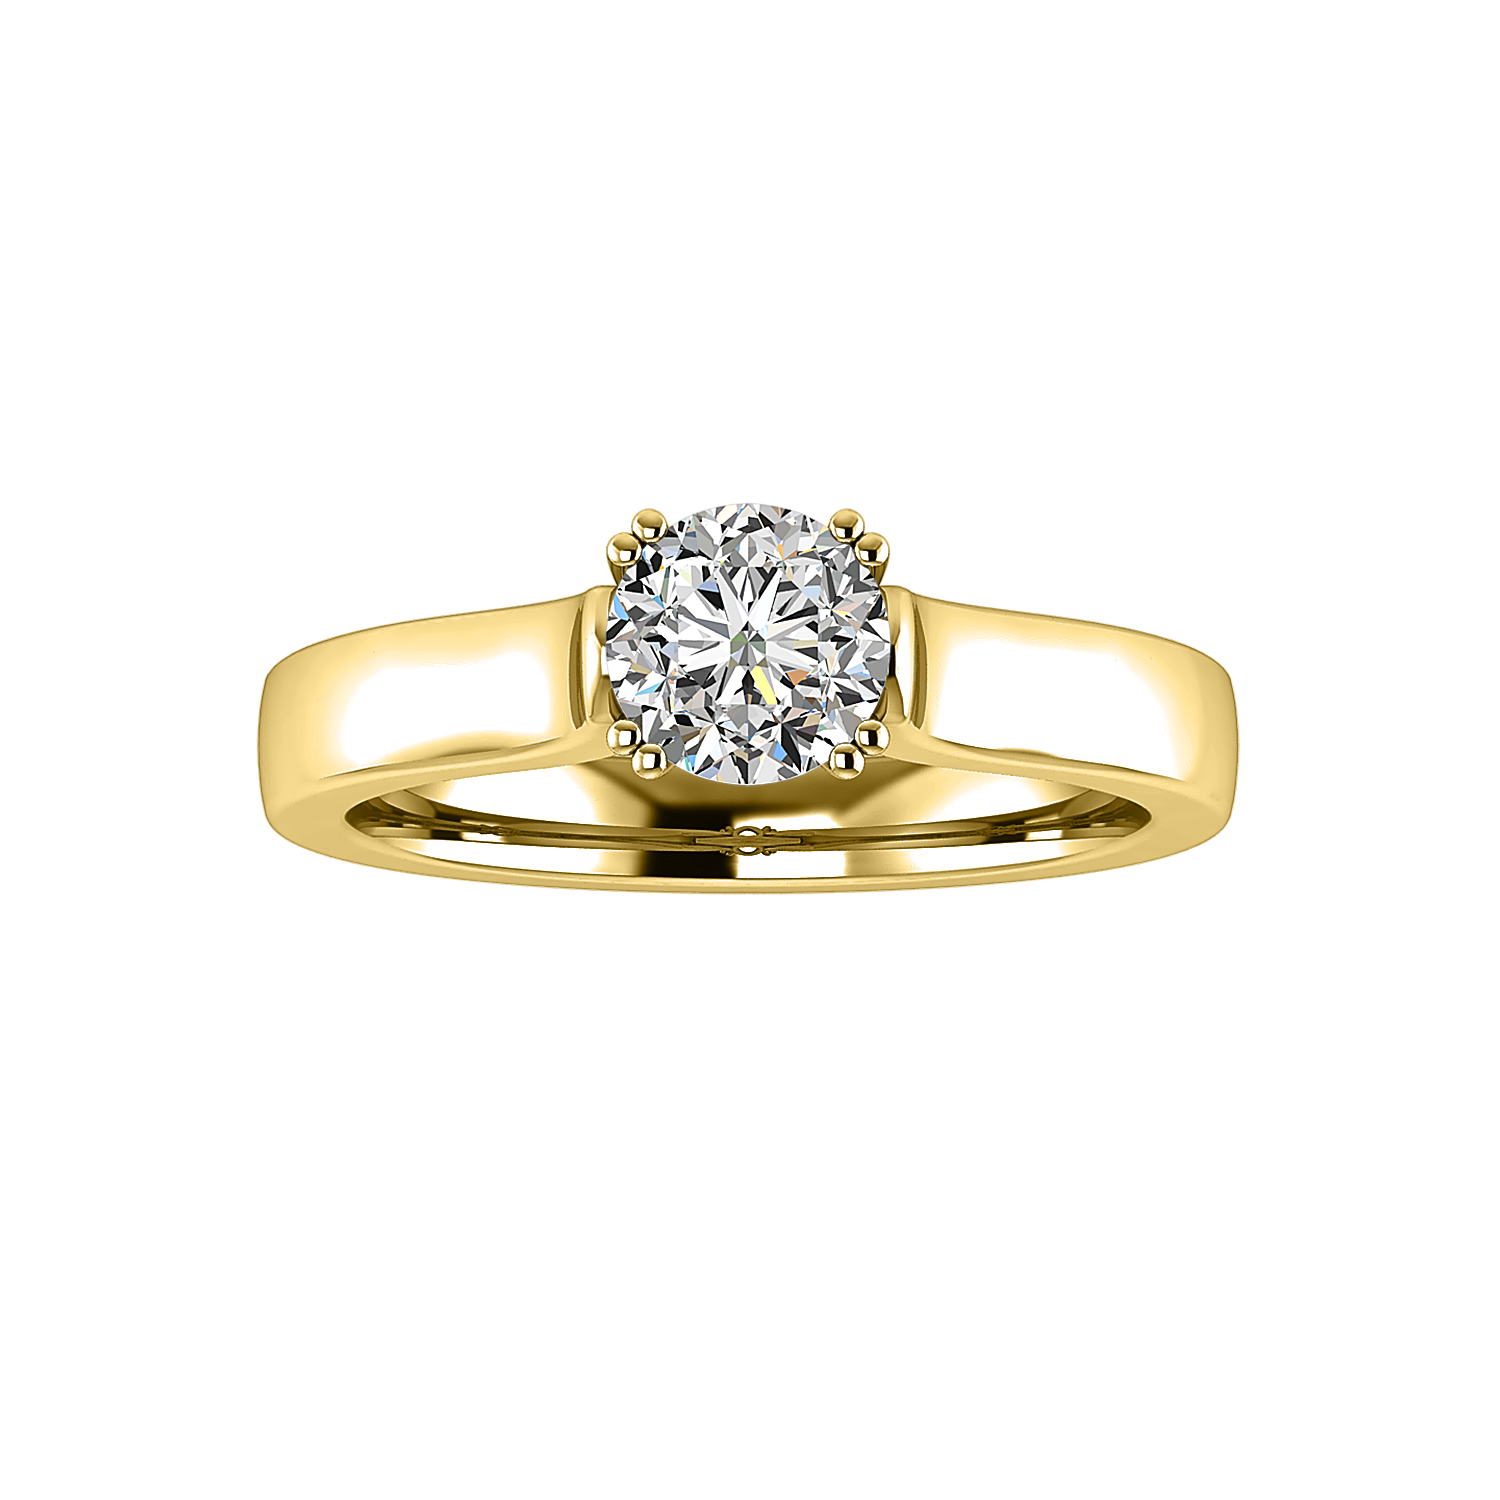 Emerson Solitaire engagement ring